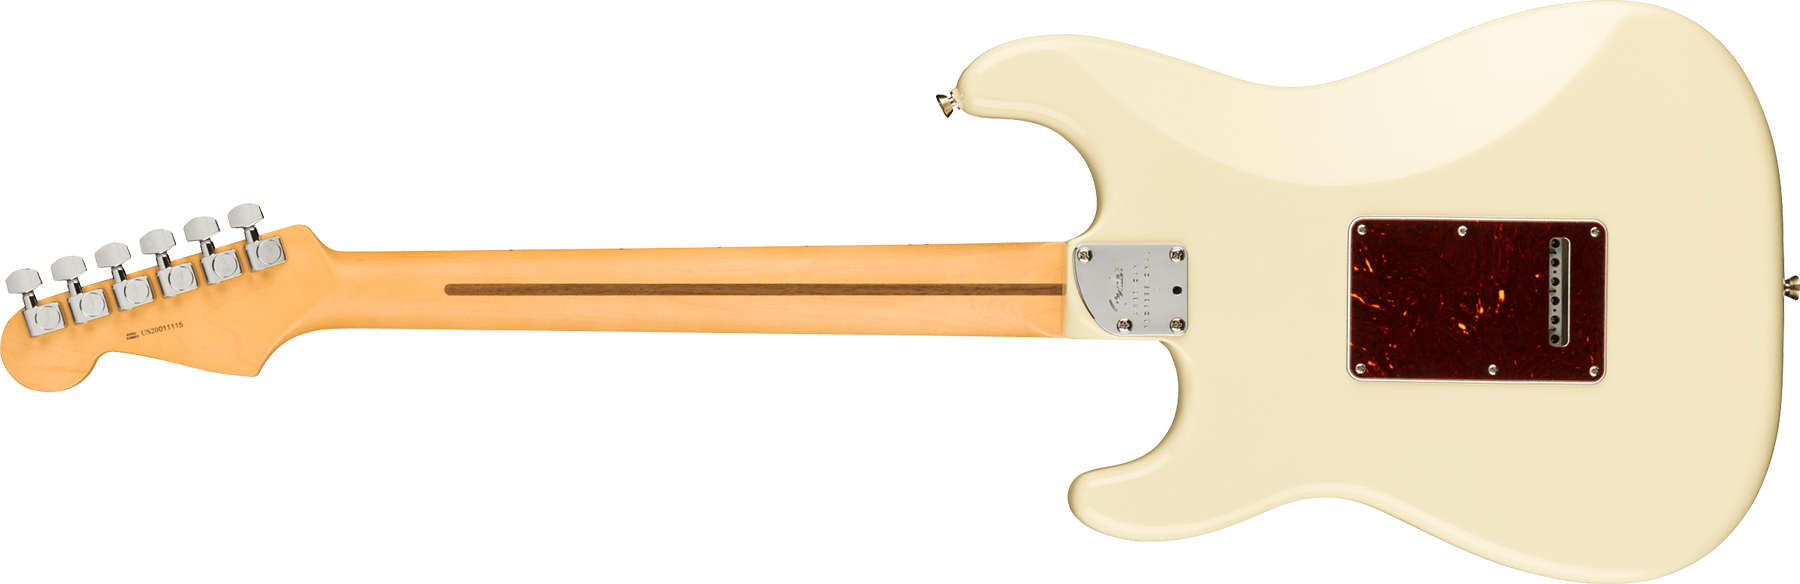 Fender Strat American Professional Ii Usa Mn - Olympic White - Str shape electric guitar - Variation 1